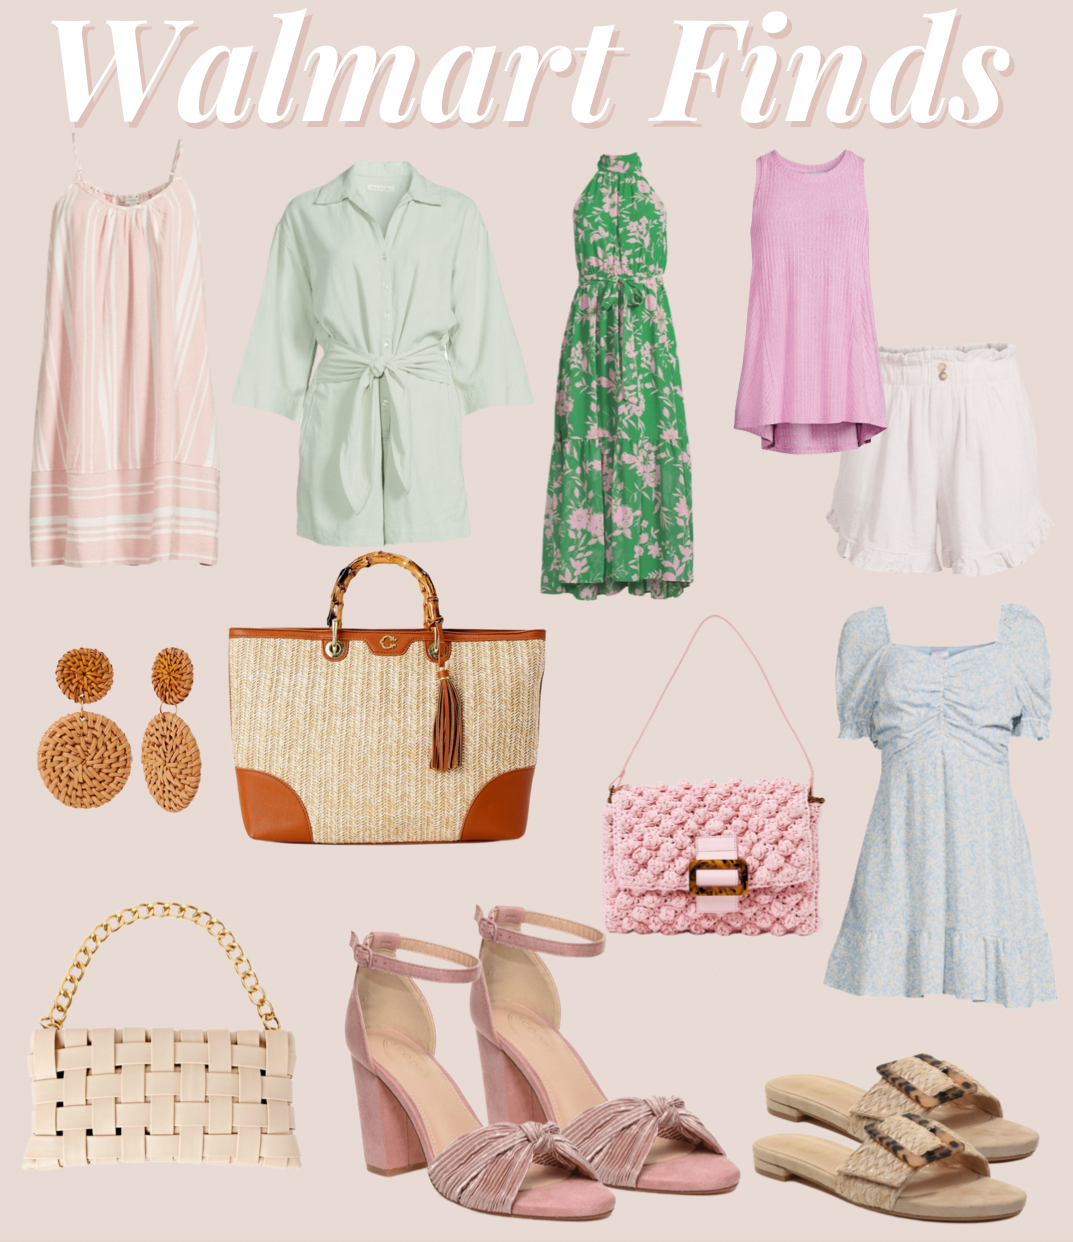 New Walmart Finds to Refresh Your Wardrobe - Best Walmart Womens Dresses - Casual Summer Outfits 2022 - Affordable Walmart Fashion